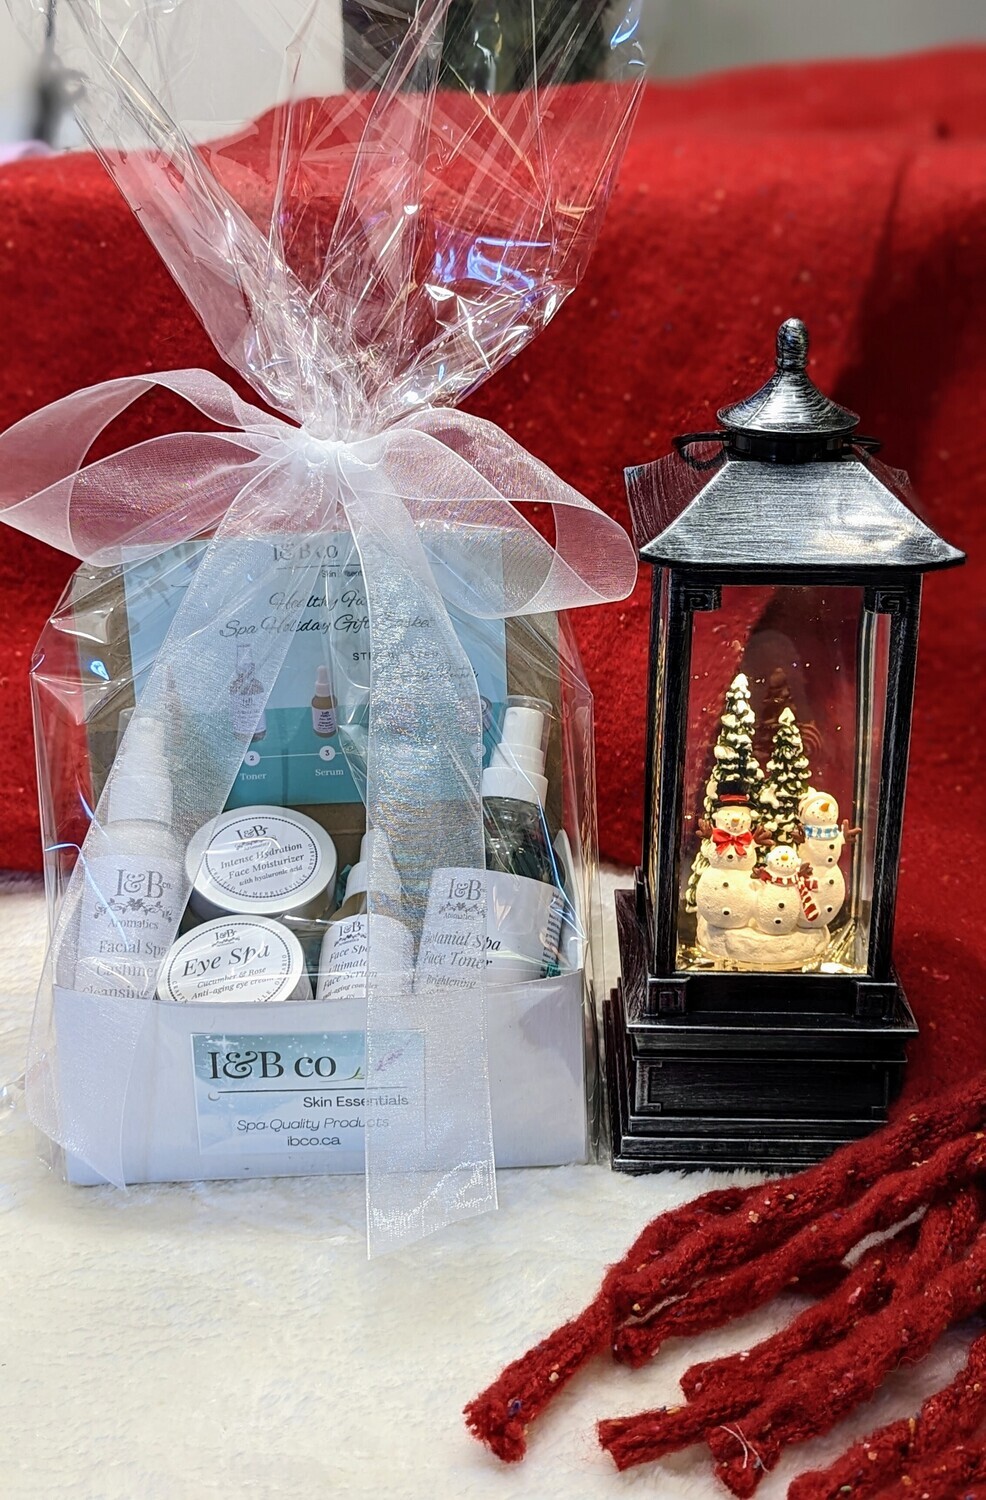 Healthy Face Spa Holiday Gift Basket – Save $14.00